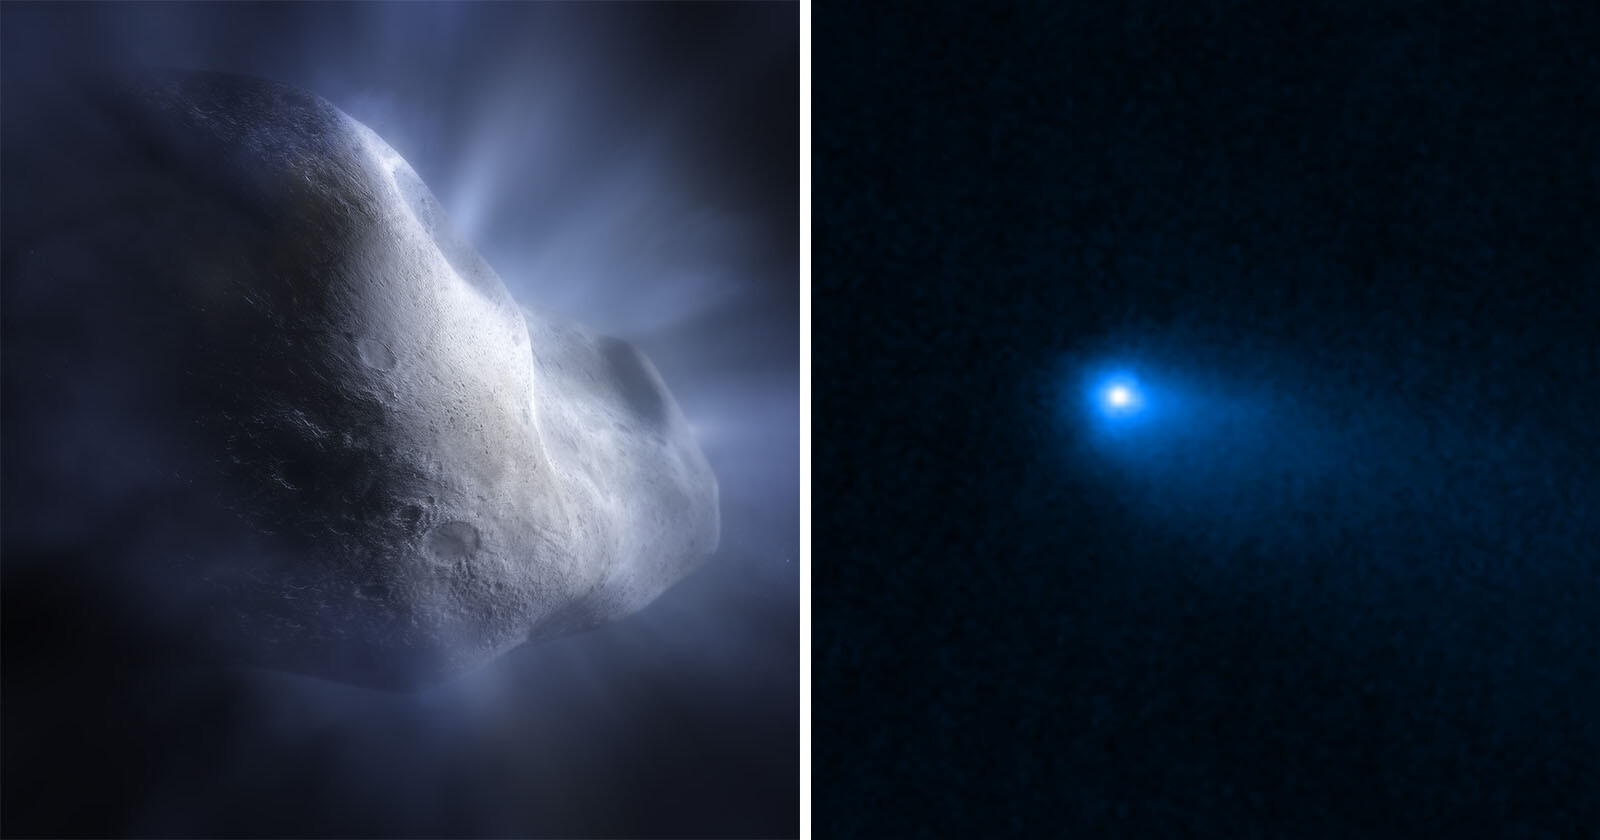 Webb Finds Water in Rare Main-Belt Comet, Spurring New Mysteries